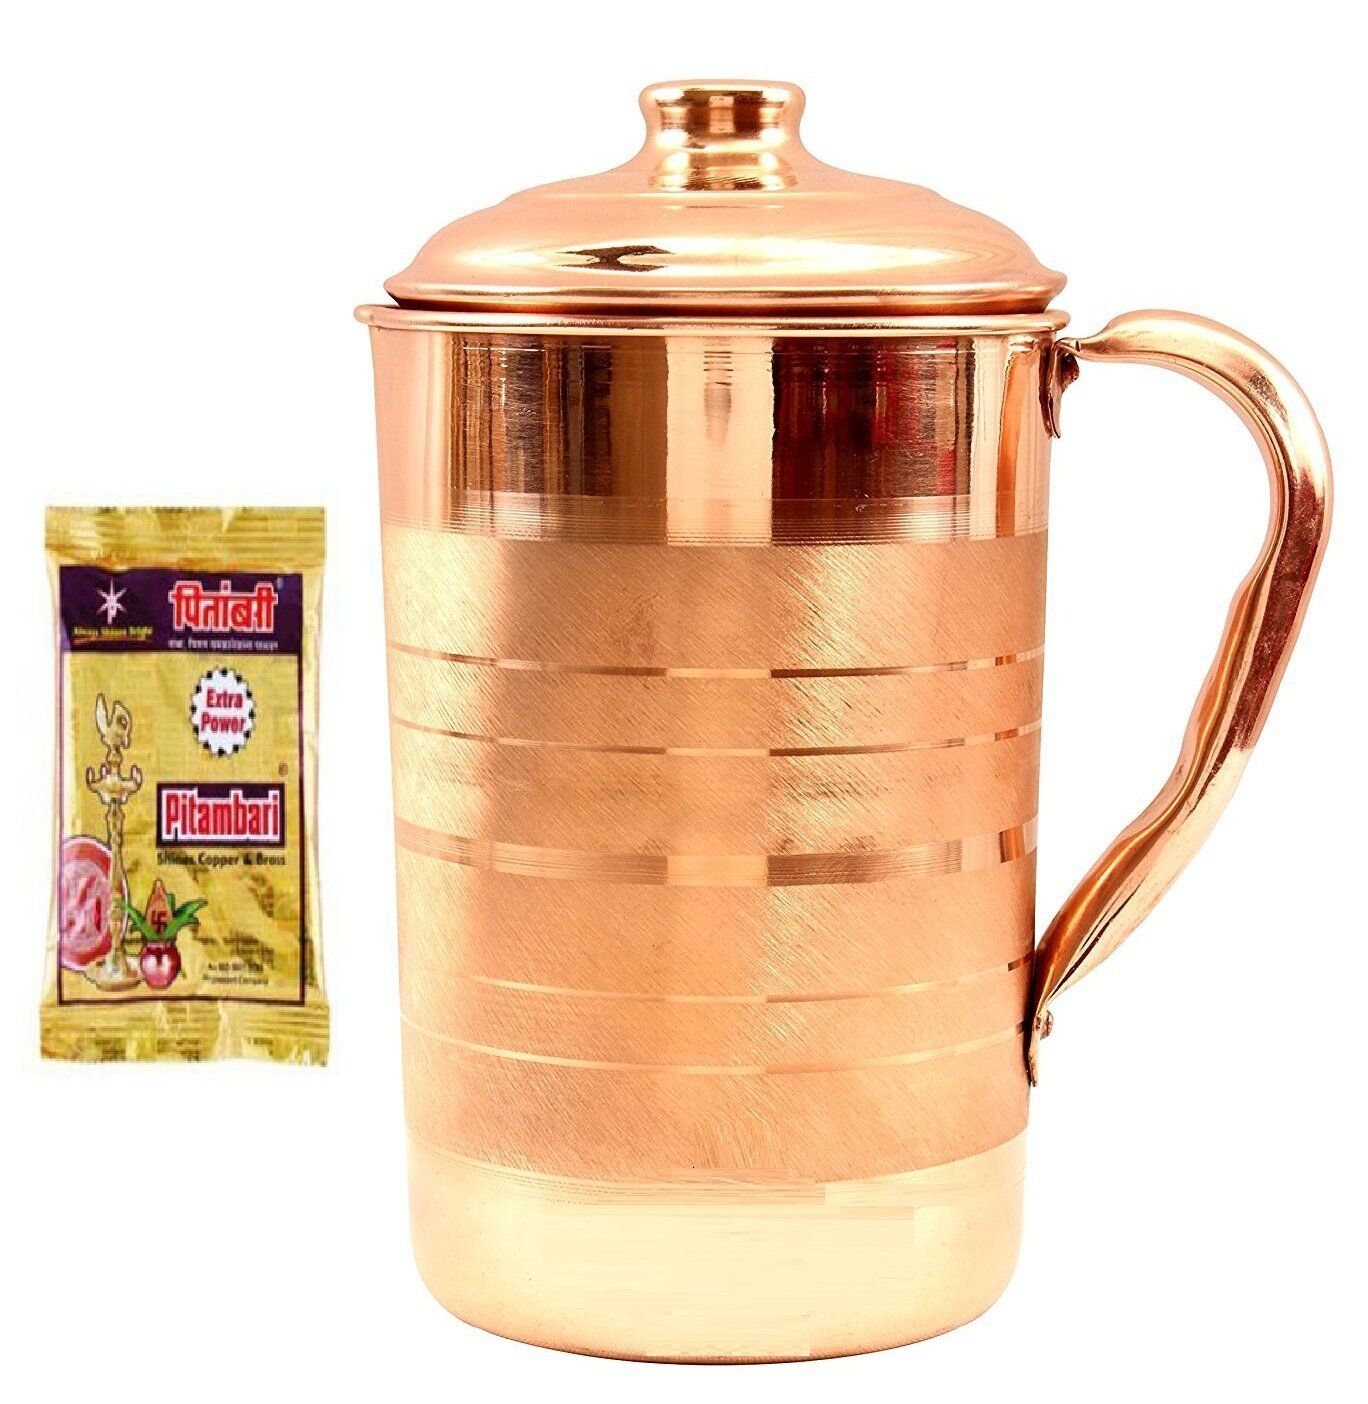 Pure Copper Jug Pitcher, 1700 ml for Storage & Serving Water with Free Pitambri